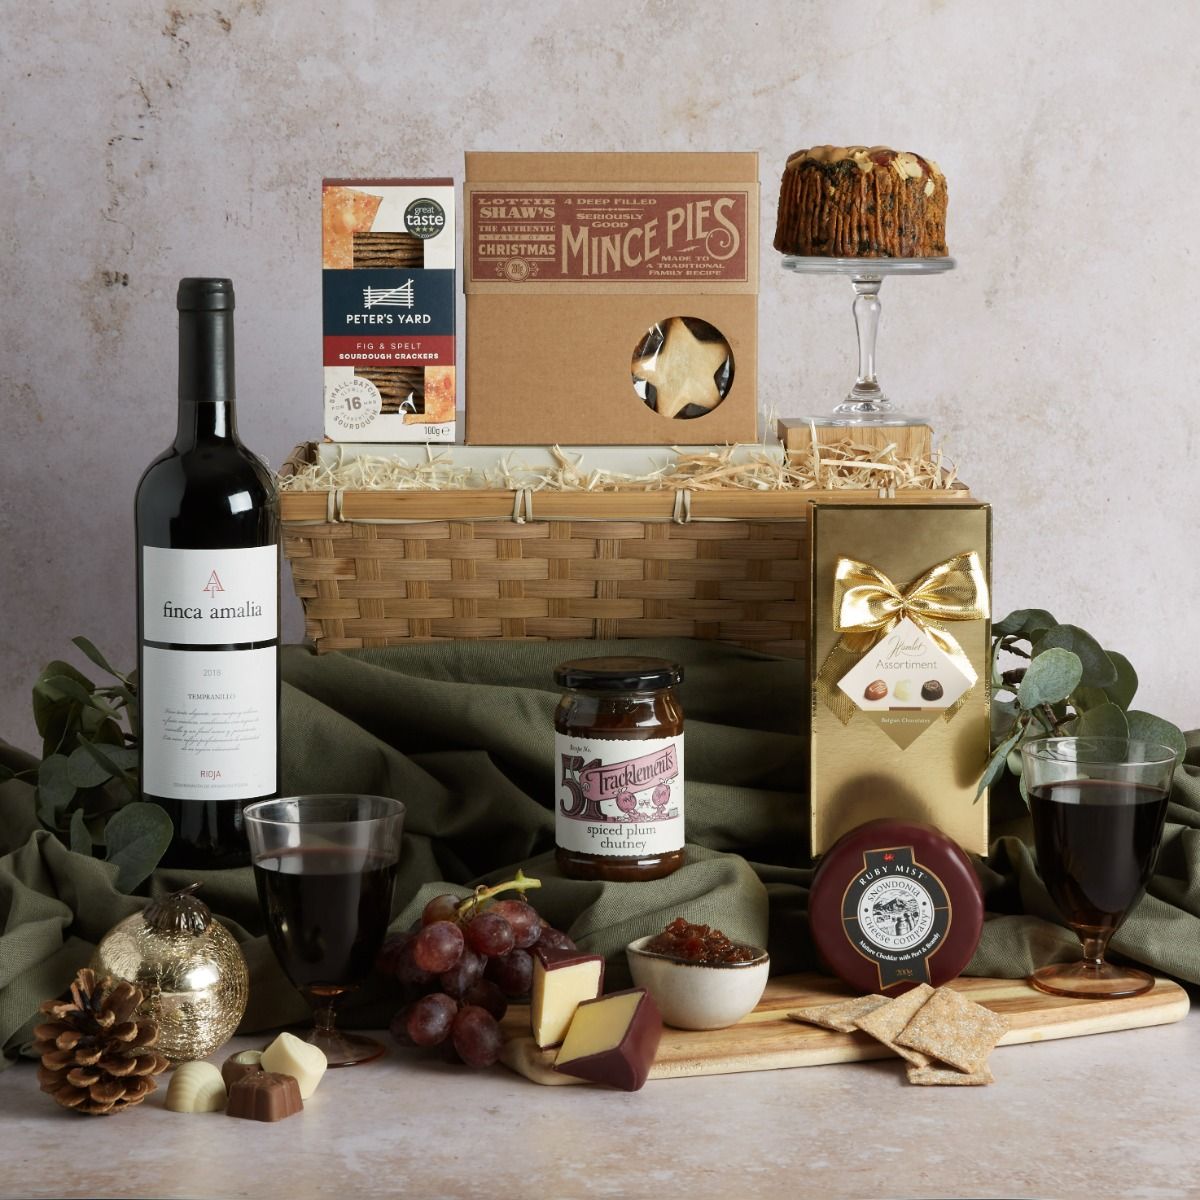 The Classic Christmas Hamper with contents on display and a willow tray